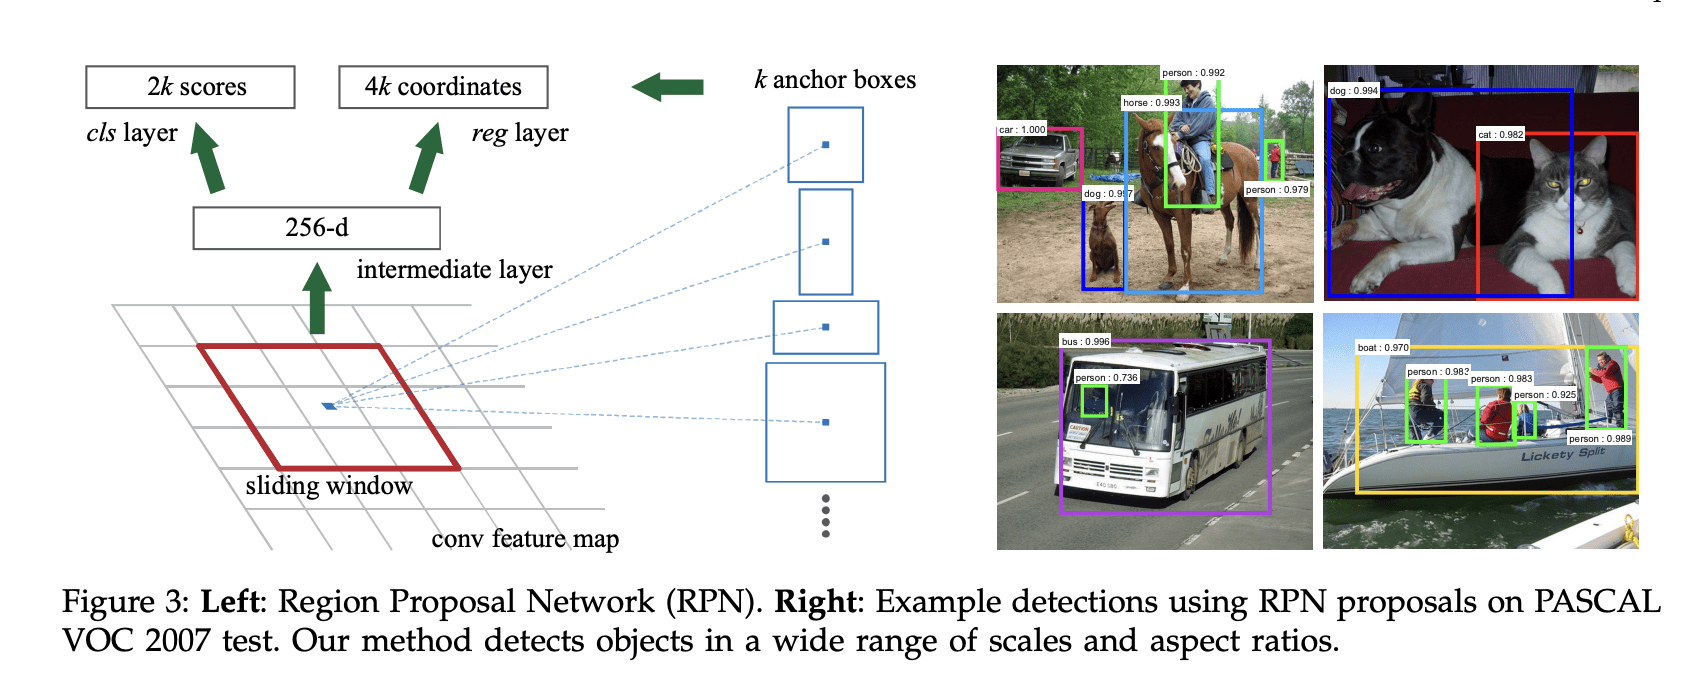 Finally understand Anchor Boxes in Object Detection (2D and 3D)